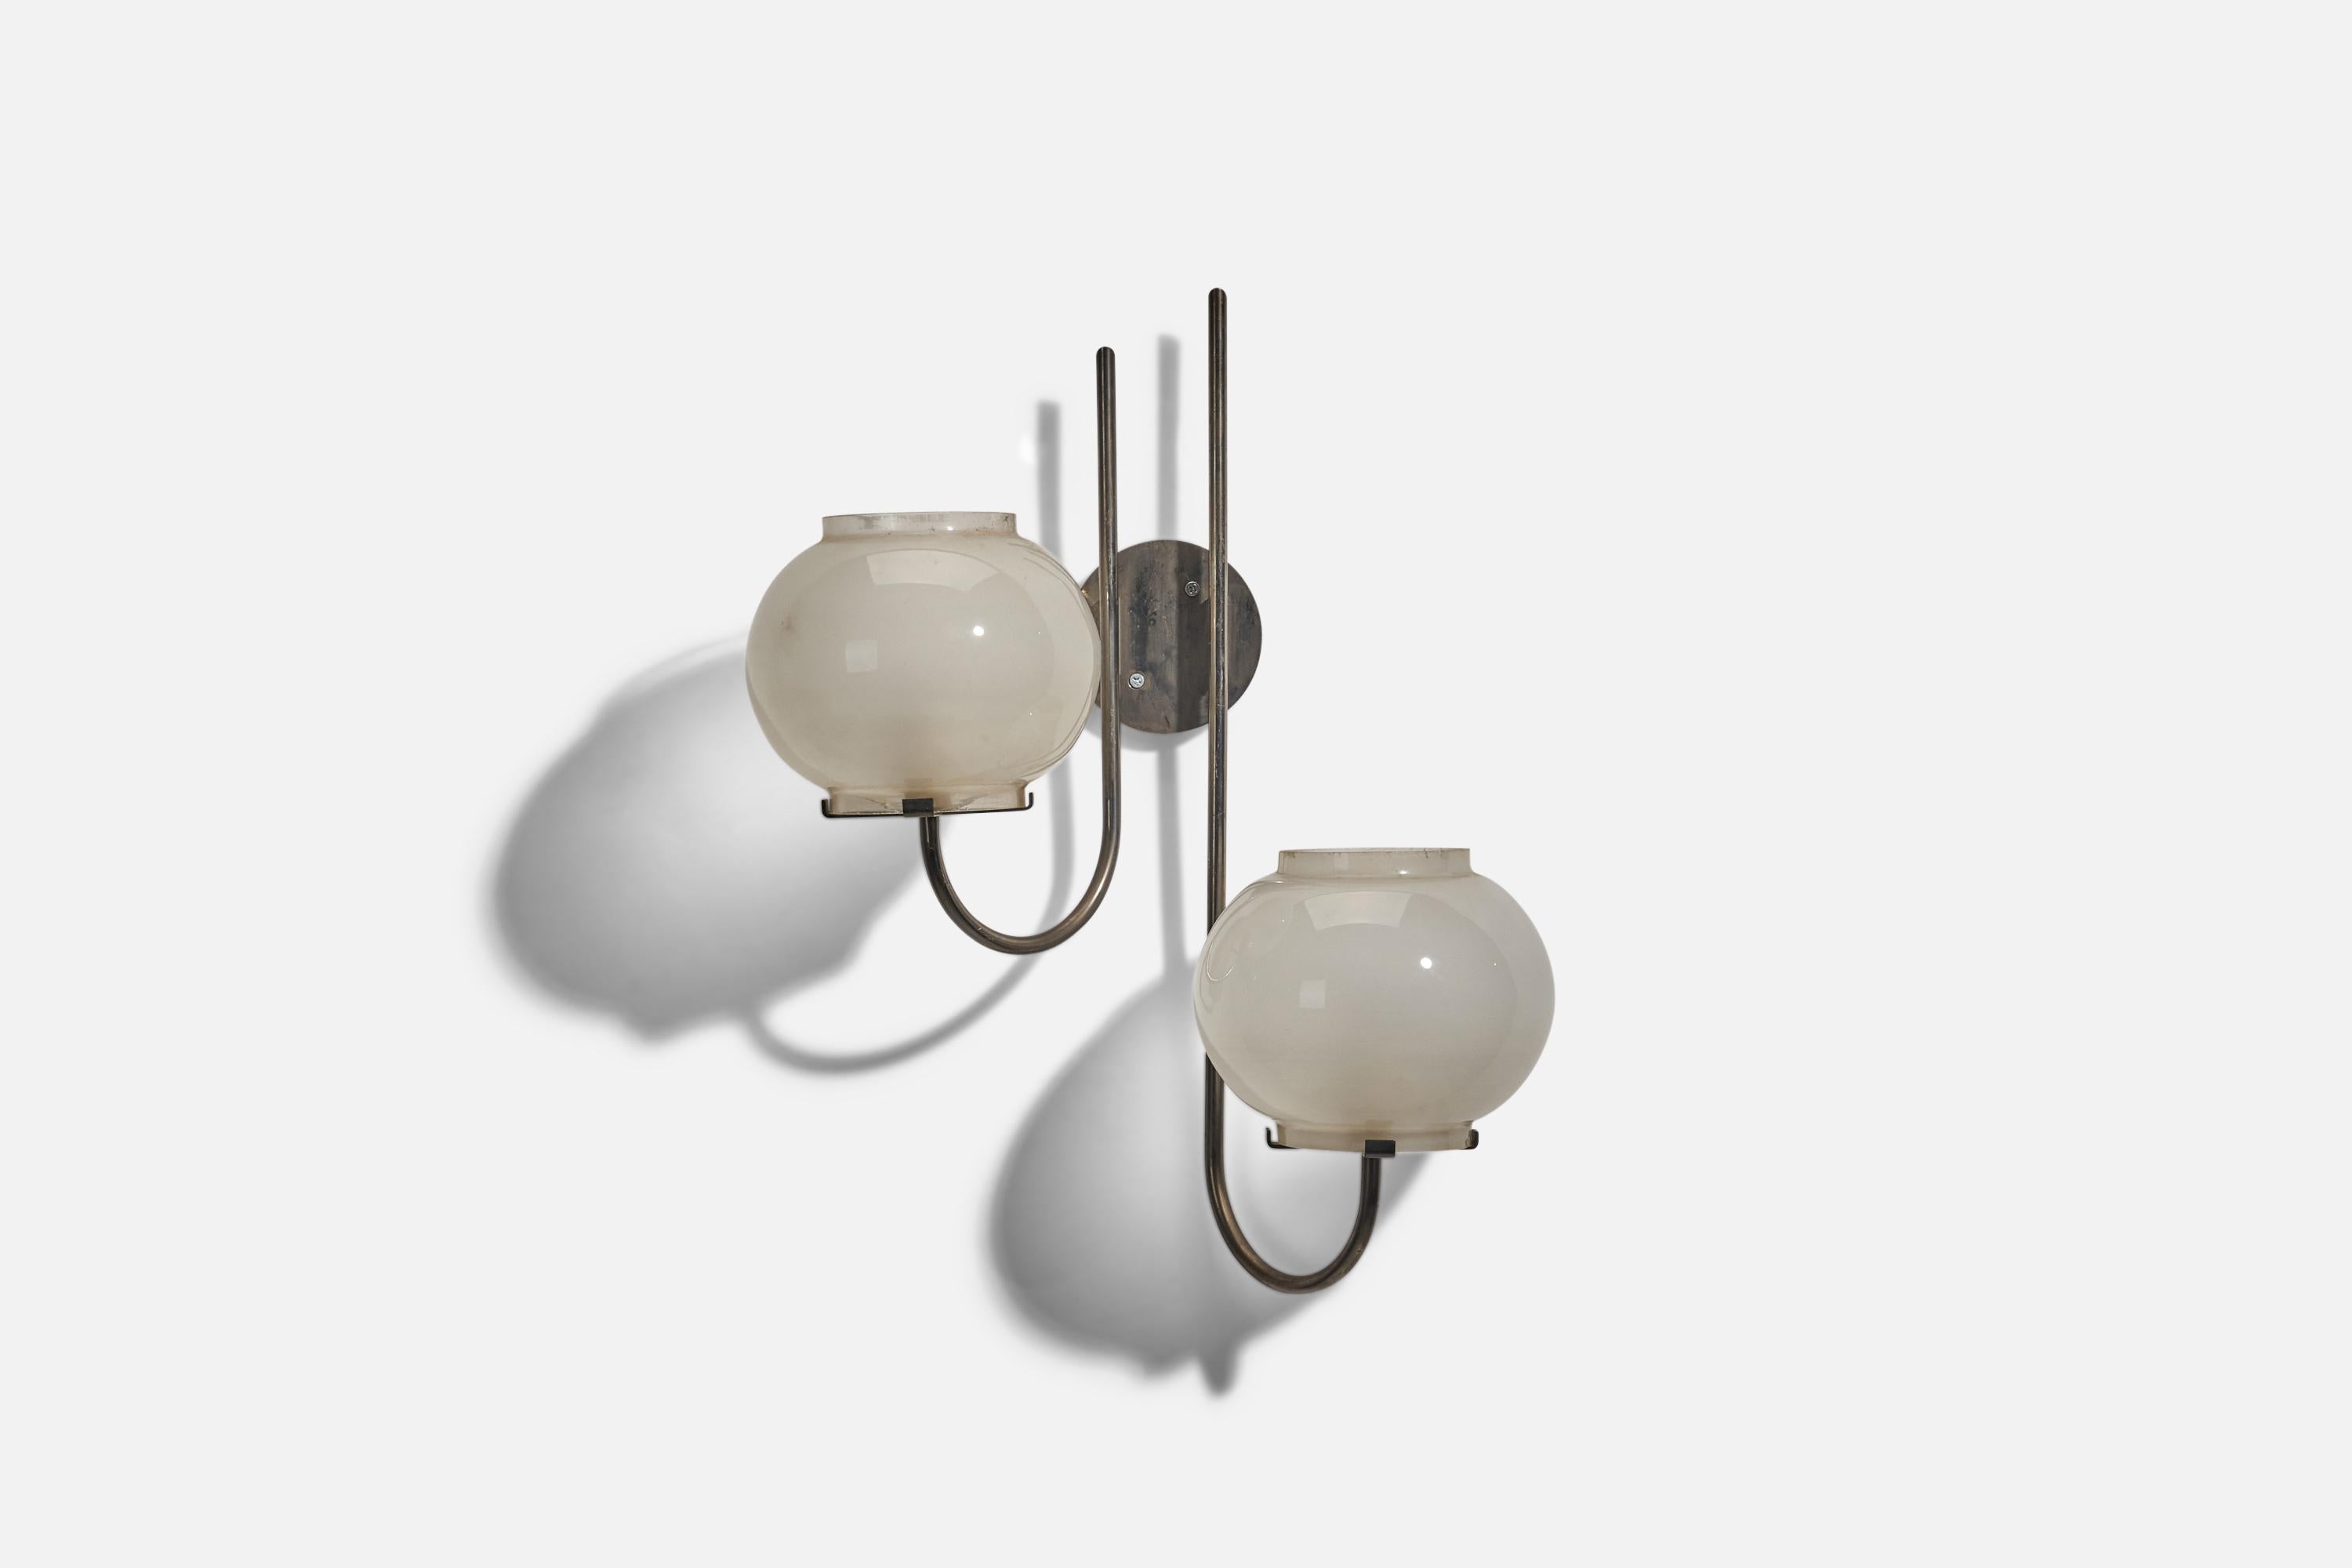 A pair of metal and glass sconces designed by Tito Agnoli and produced by O-Luce, Italy, 1961. 

Dimensions of back plate (inches) : 3.93 x 3.93 x 0.63 (height x width x depth)

Sockets take E-14 bulbs.

There is no maximum wattage stated on